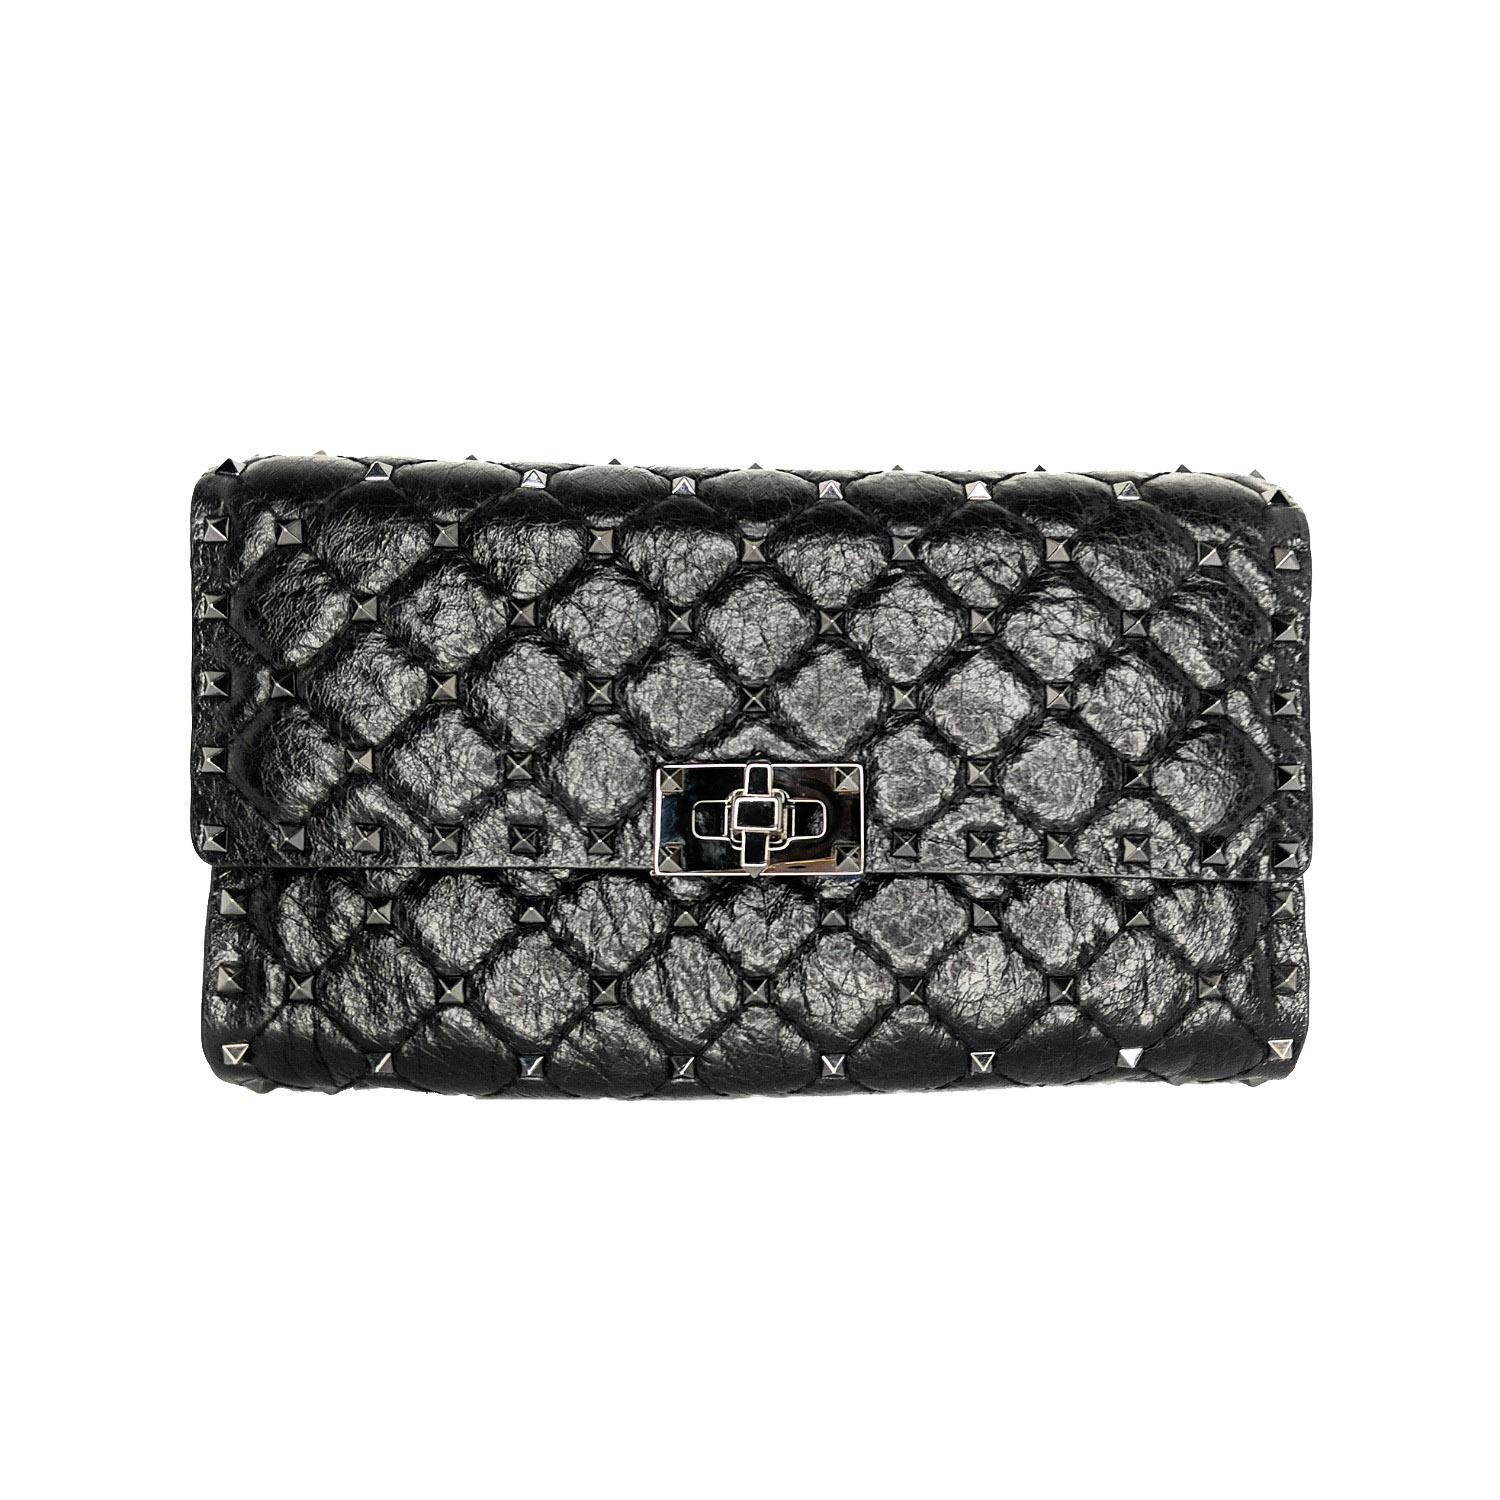 Valentino Garavani quilted, crinkled lambskin wallet-on-chain with micro signature ruthenium Rockstuds. Removable chain shoulder strap and flap top with turn-lock clasp. Interior, one zip pocket; one bill and eight card slots. Made in Italy. Retail